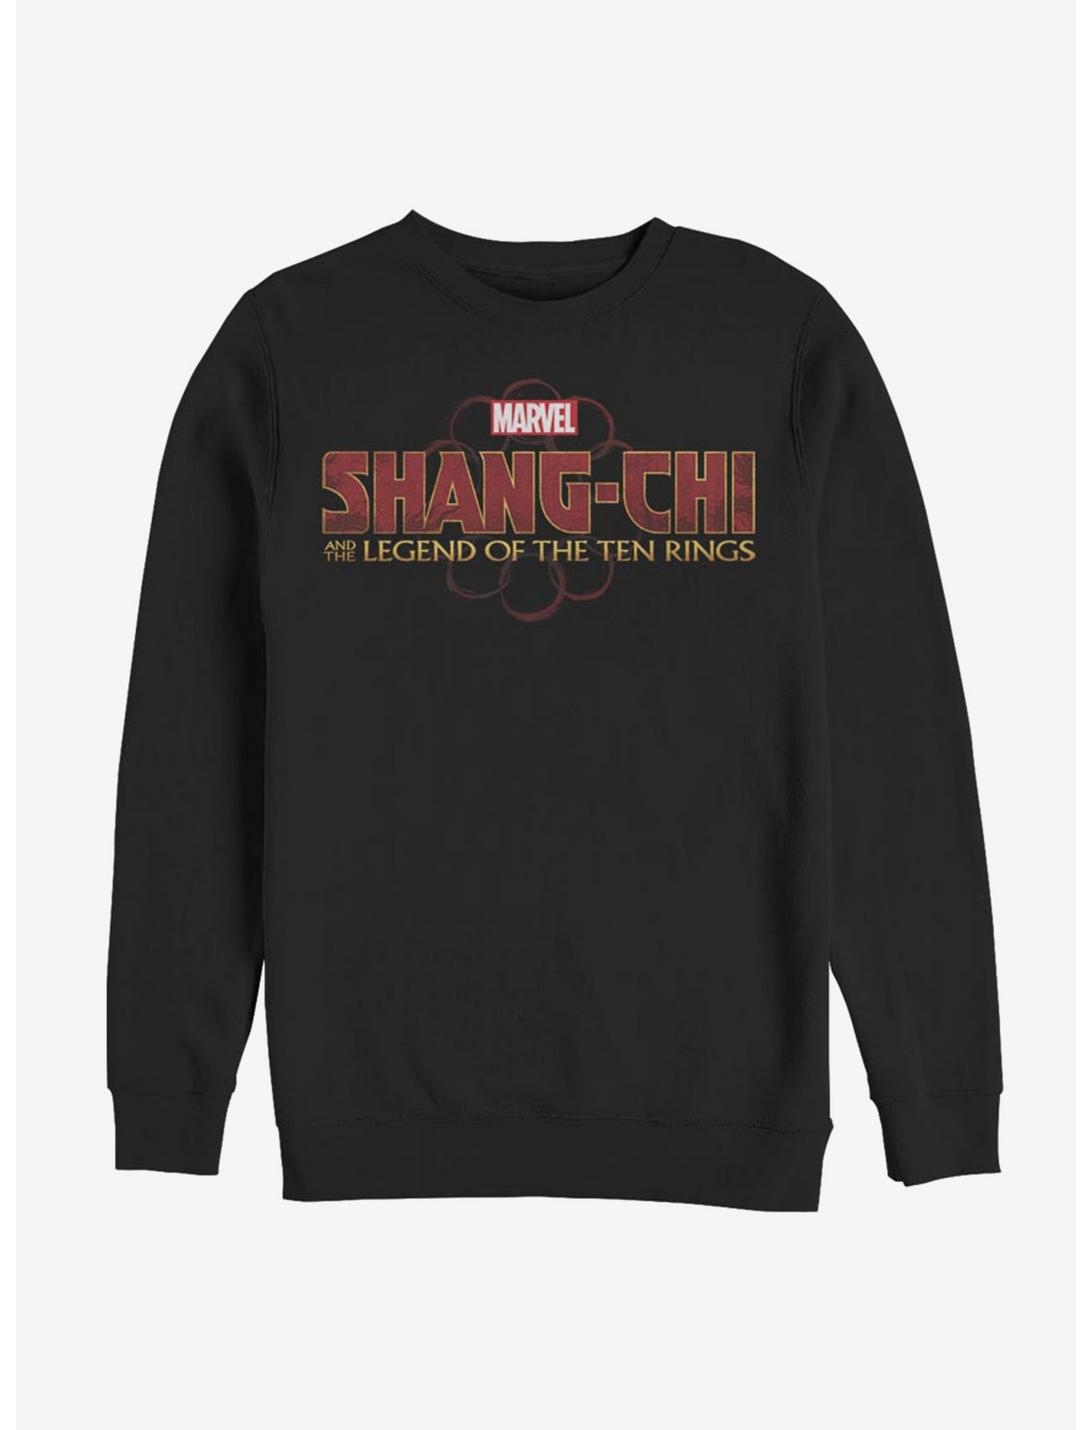 Marvel Shang-Chi And The Legend Of The Ten Rings Sweatshirt, BLACK, hi-res